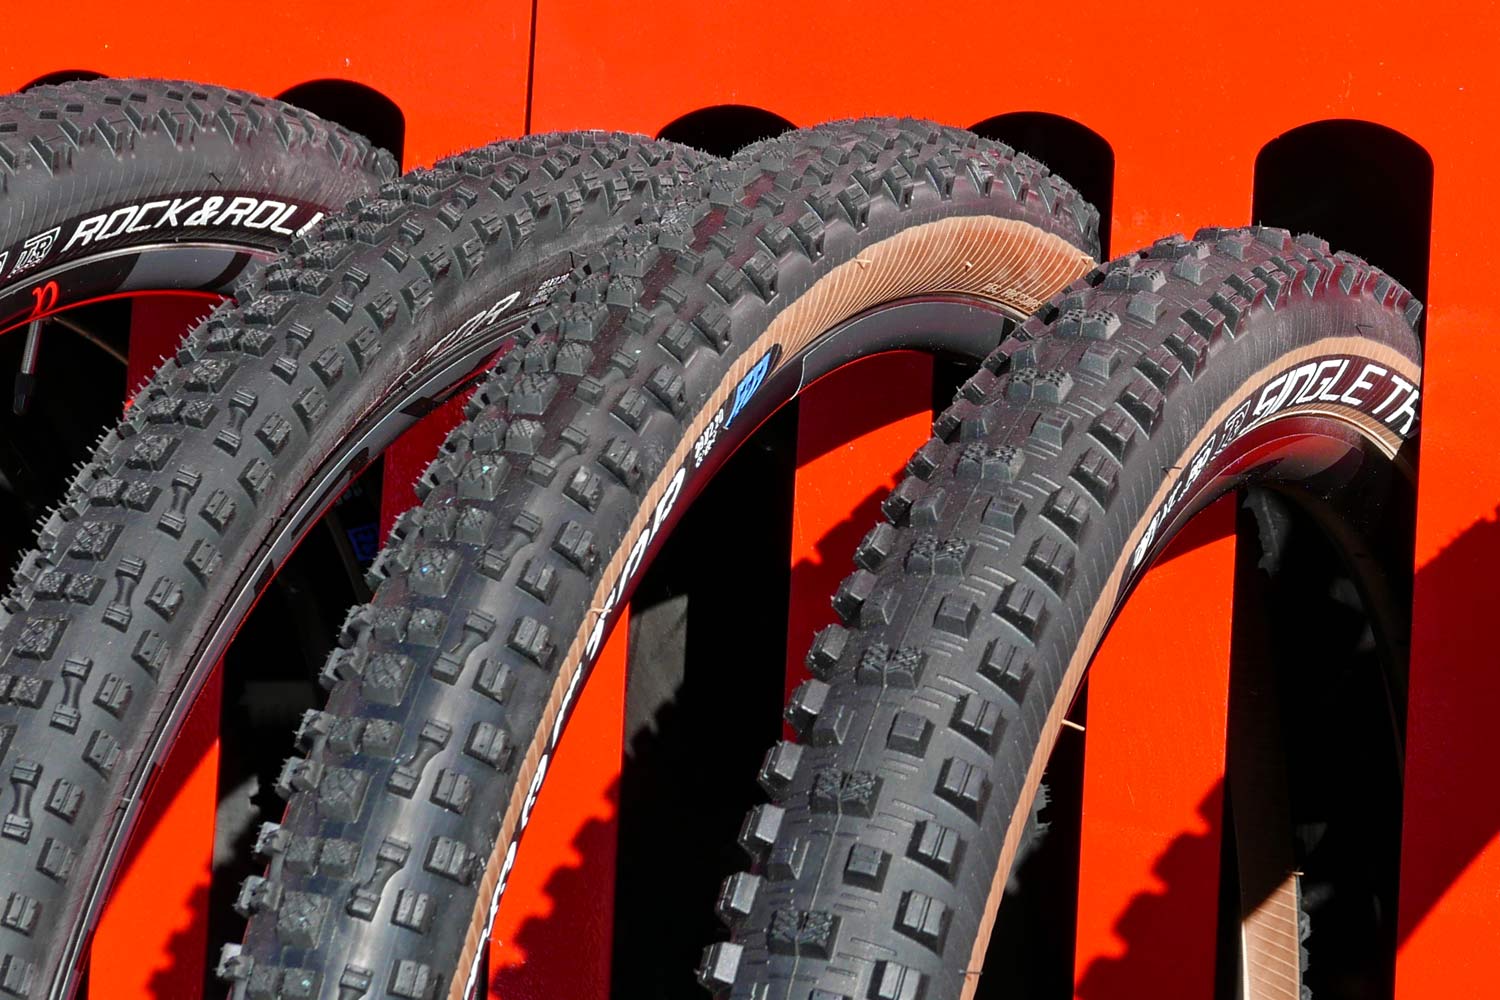 2020 MSC mountain bike tire line-up, Dragster XC cross-country, Rock & Roller XC cross-country marathon, Singletrack trail all-mountain, Hot Seat enduro DH